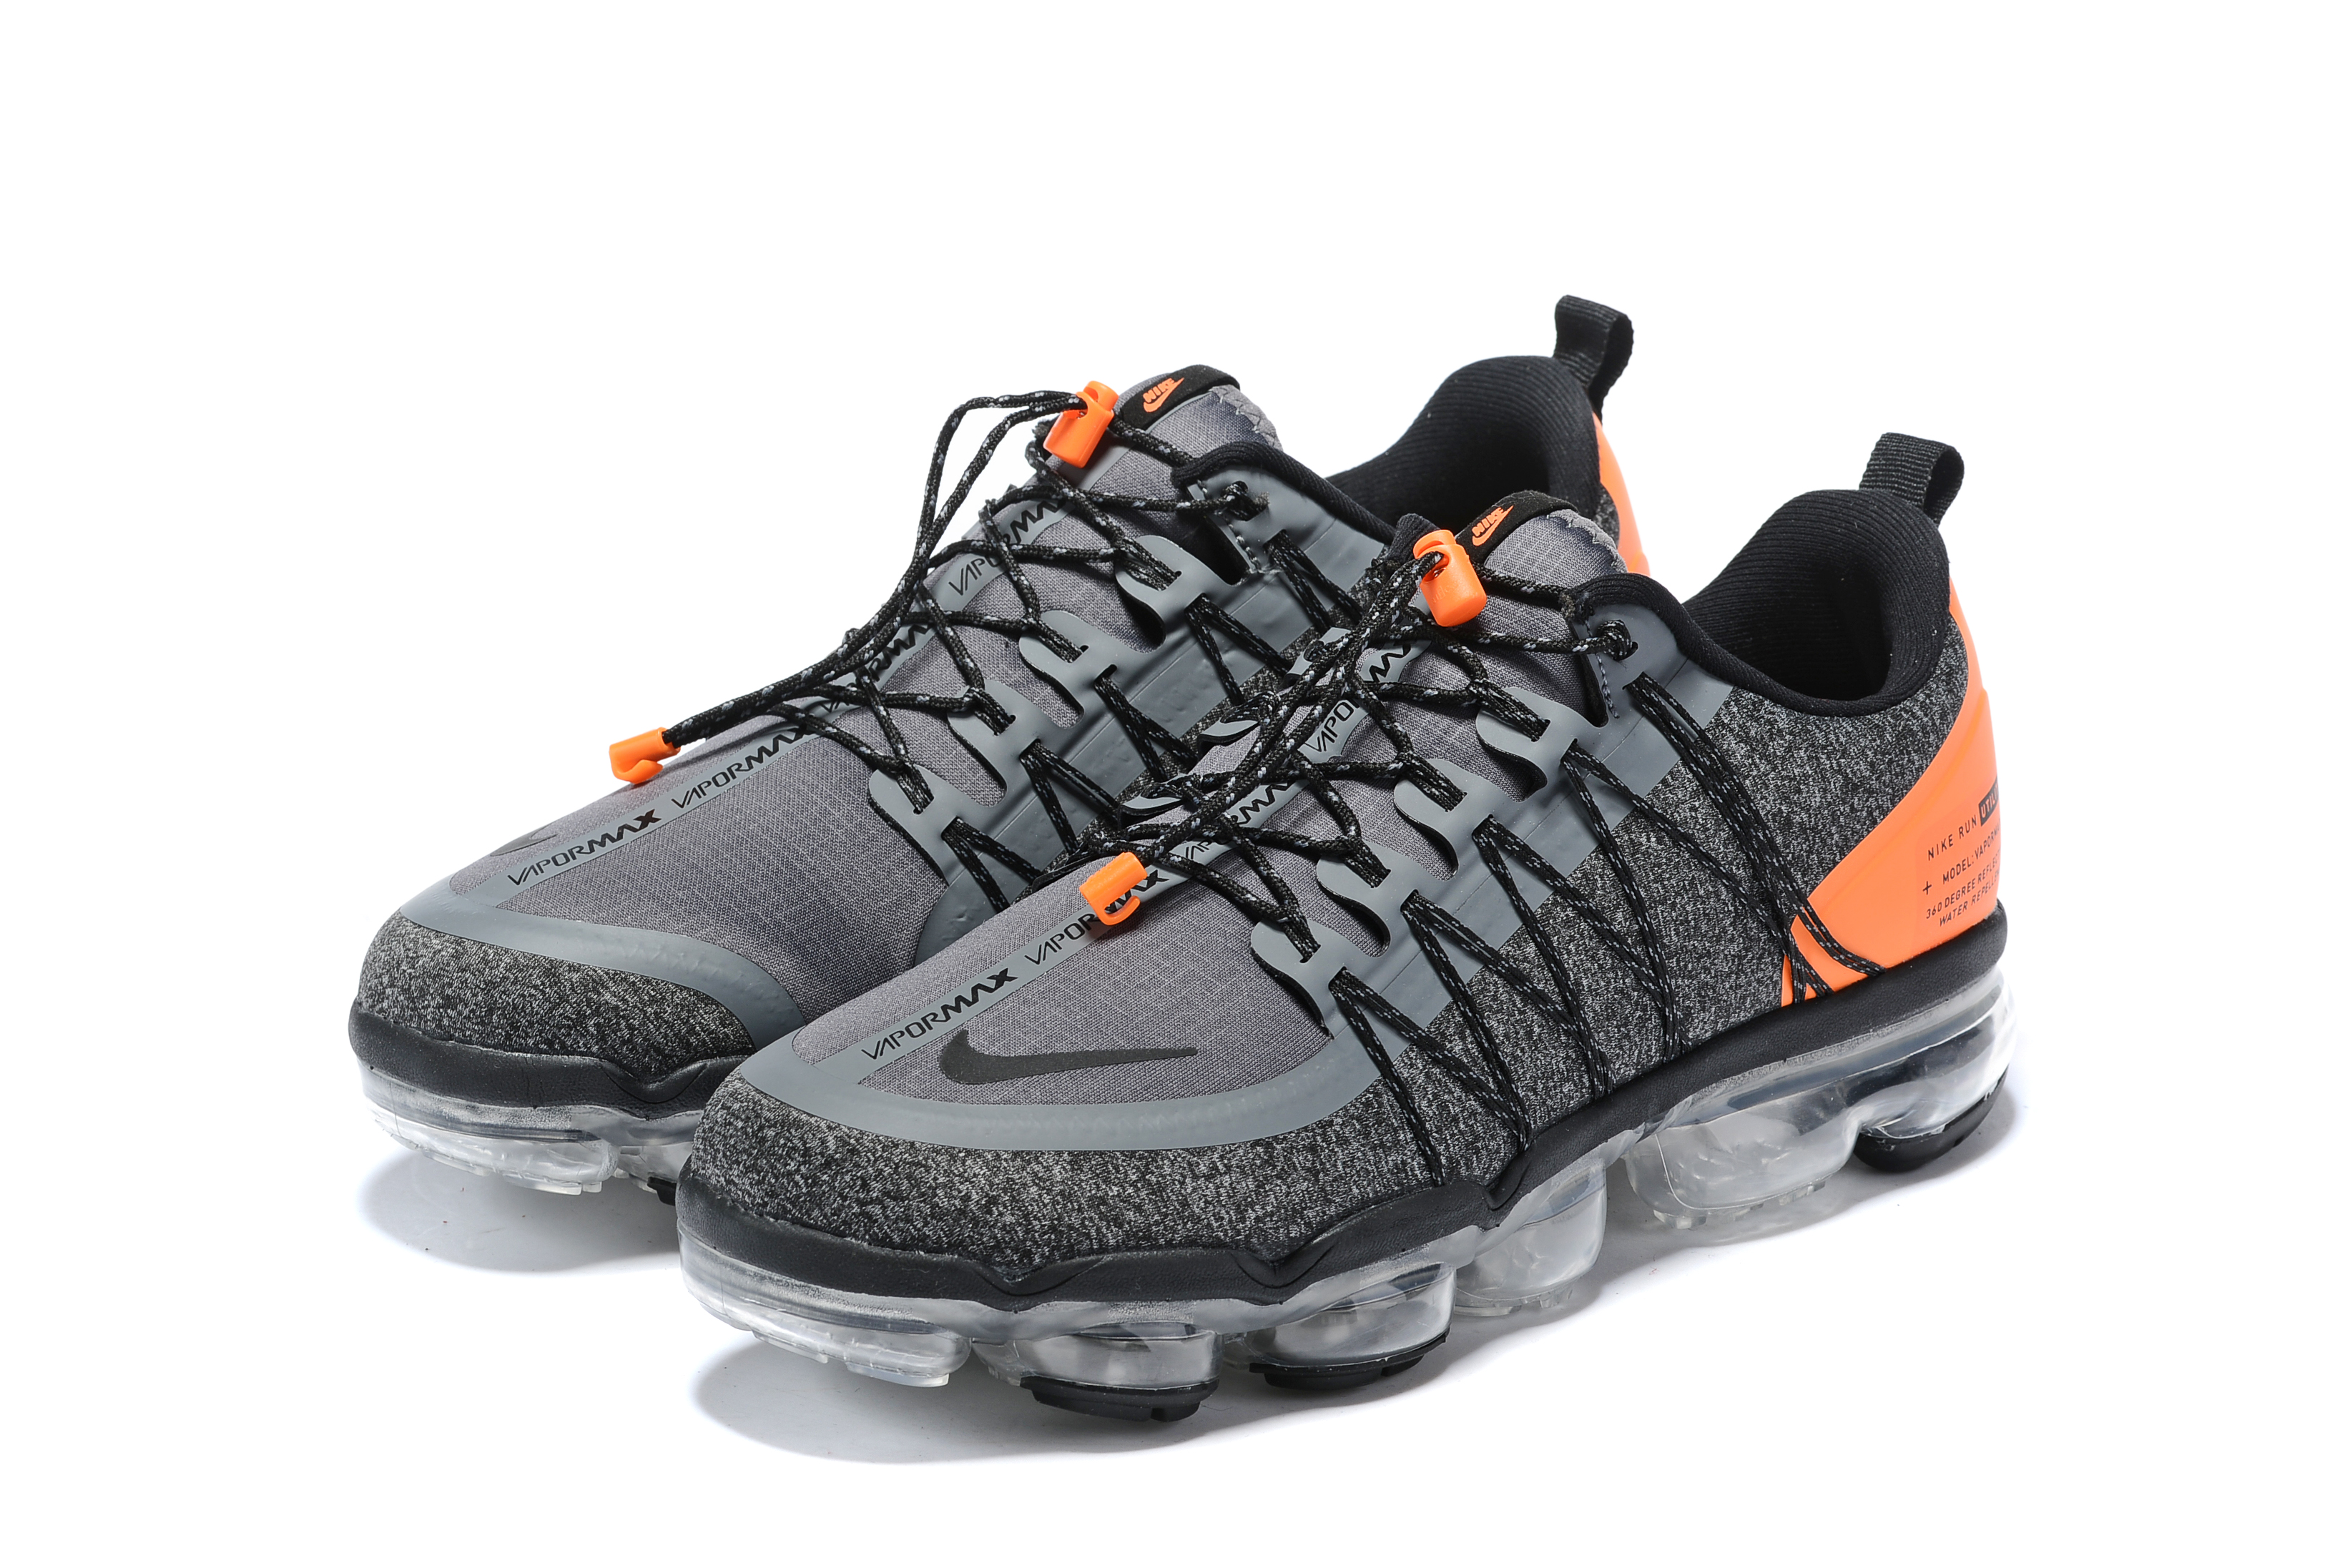 Men's Running weapon Nike Air Max 2019 Shoes 020